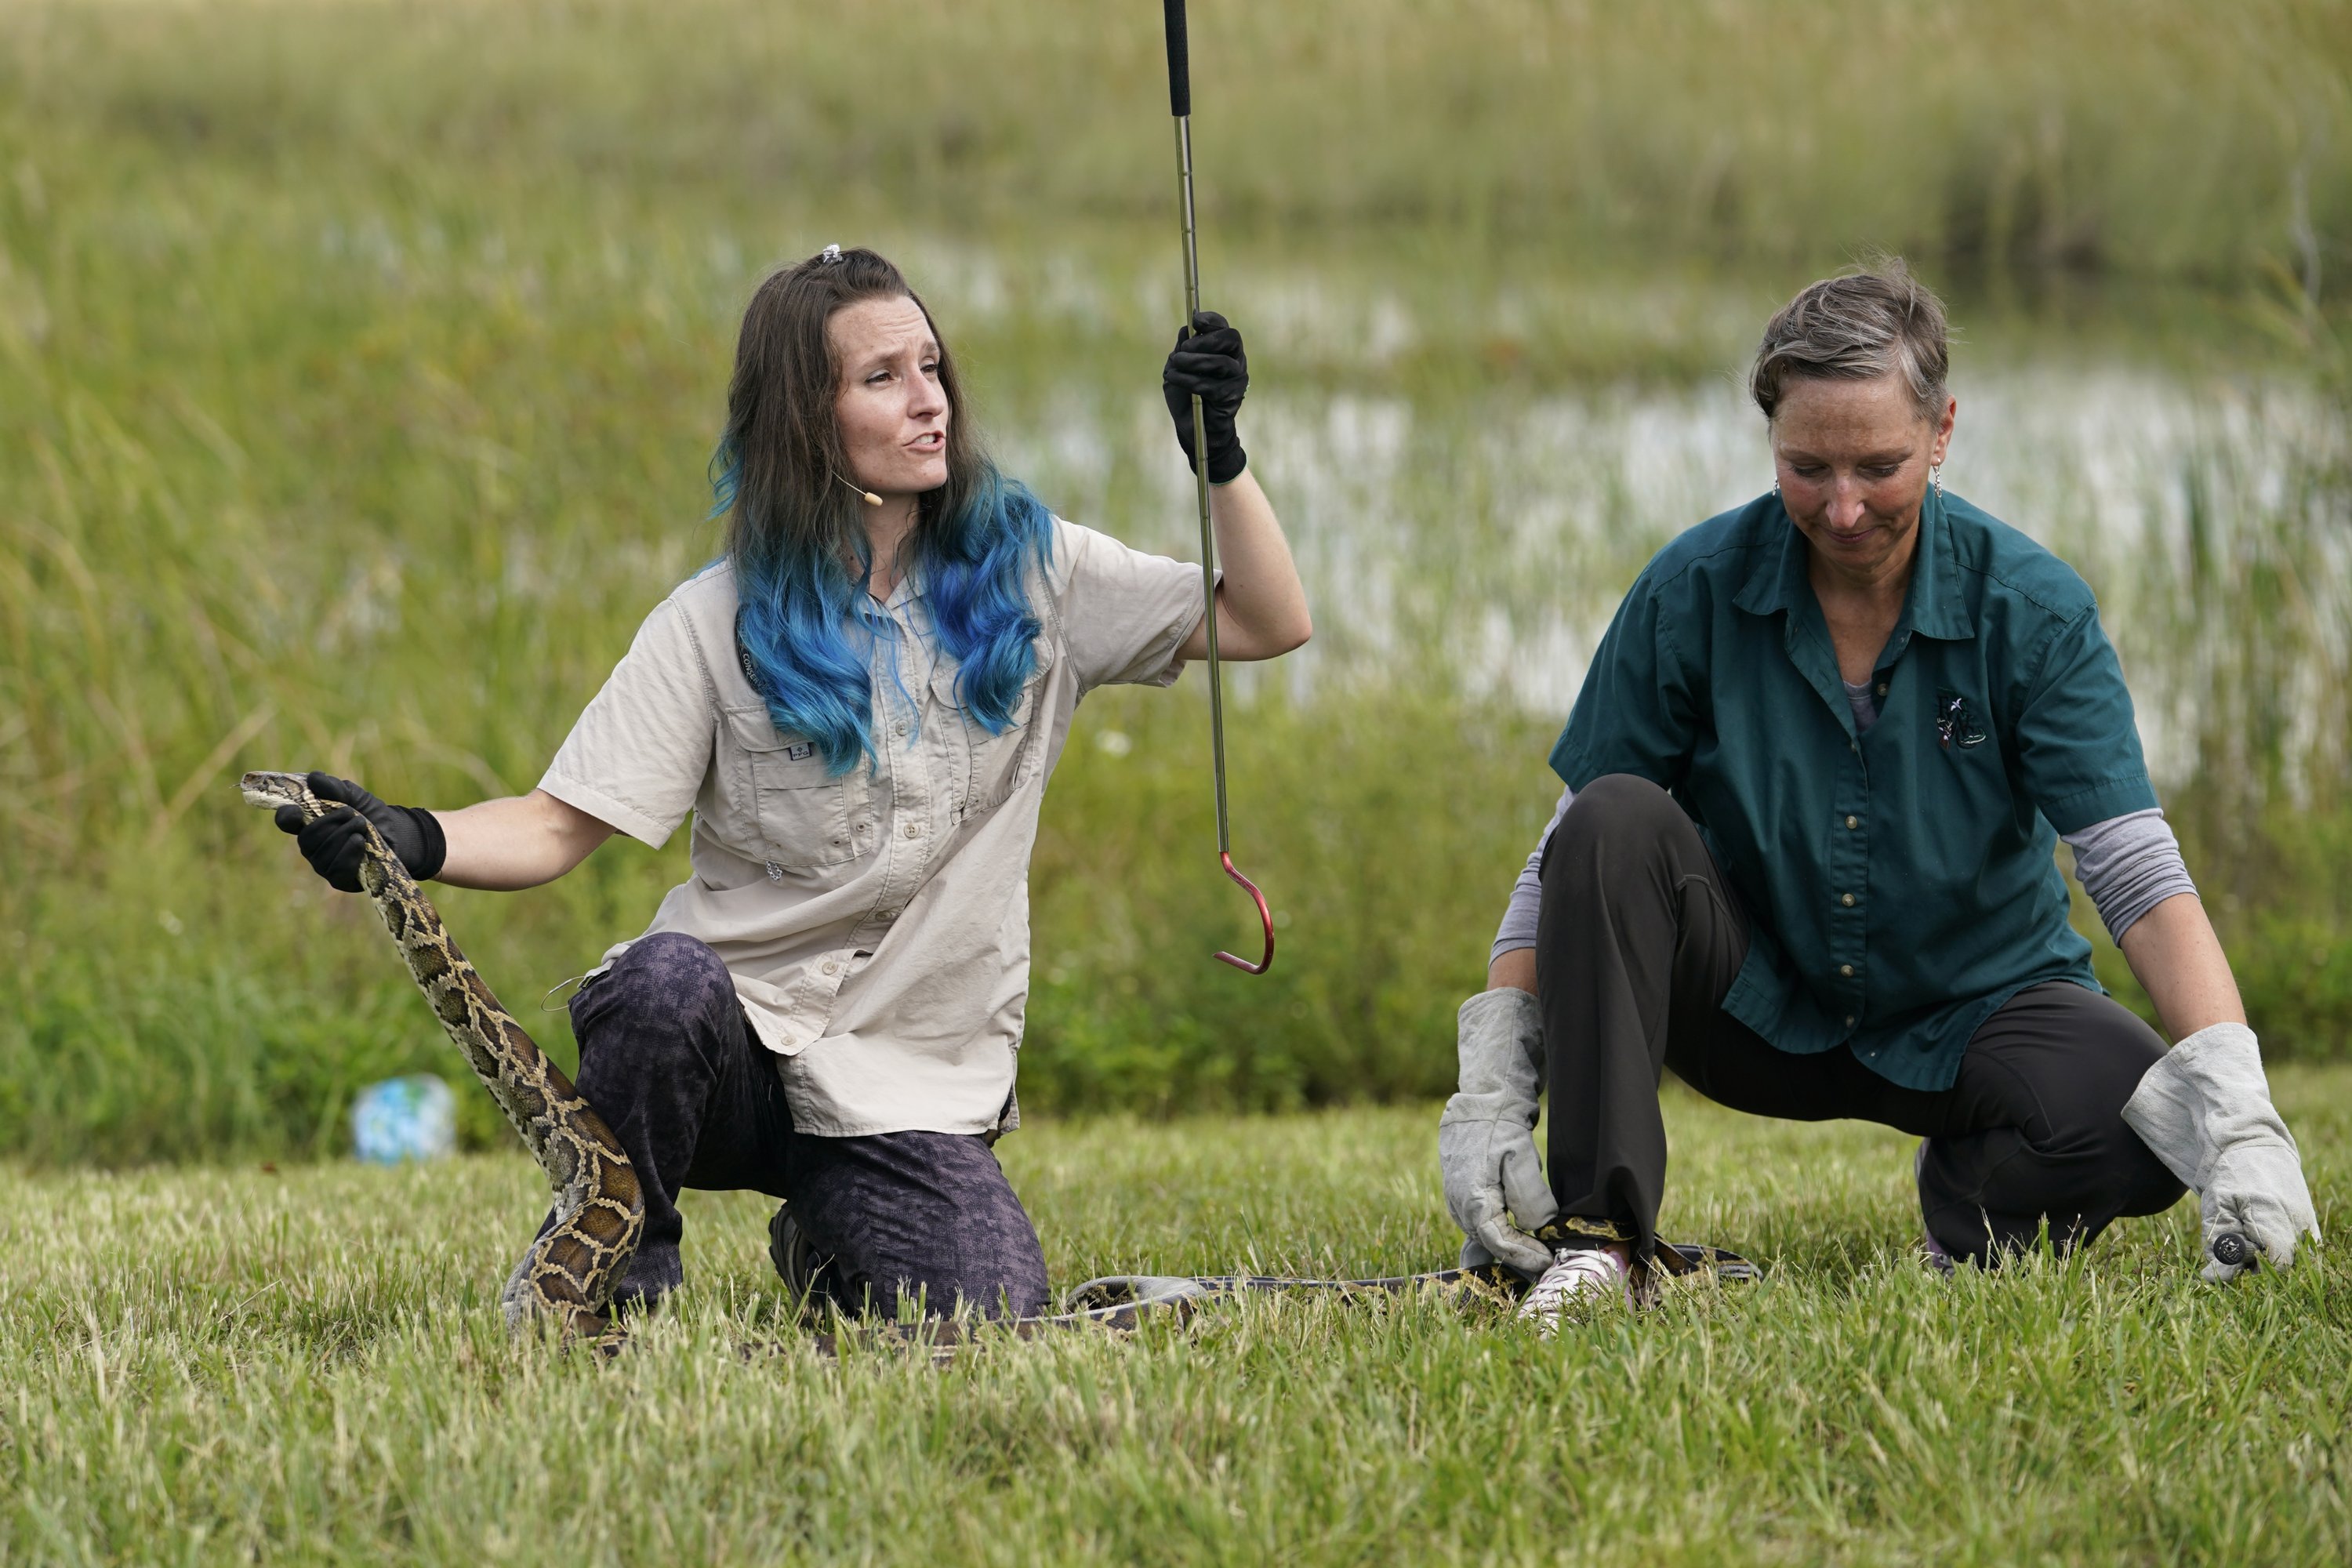 McKayla Spencer (L), and Jan Fore of the Florida Fish and Wildlife Conservation Commission (FWC), demonstrate a safe capture of a Burmese python at a media event where Florida Gov. Ron DeSantis announced that registration for the 2022 Florida Python Challenge has opened for the annual 10-day event to be held Aug 5-14, Florida, U.S., June 16, 2022. (AP Photo)